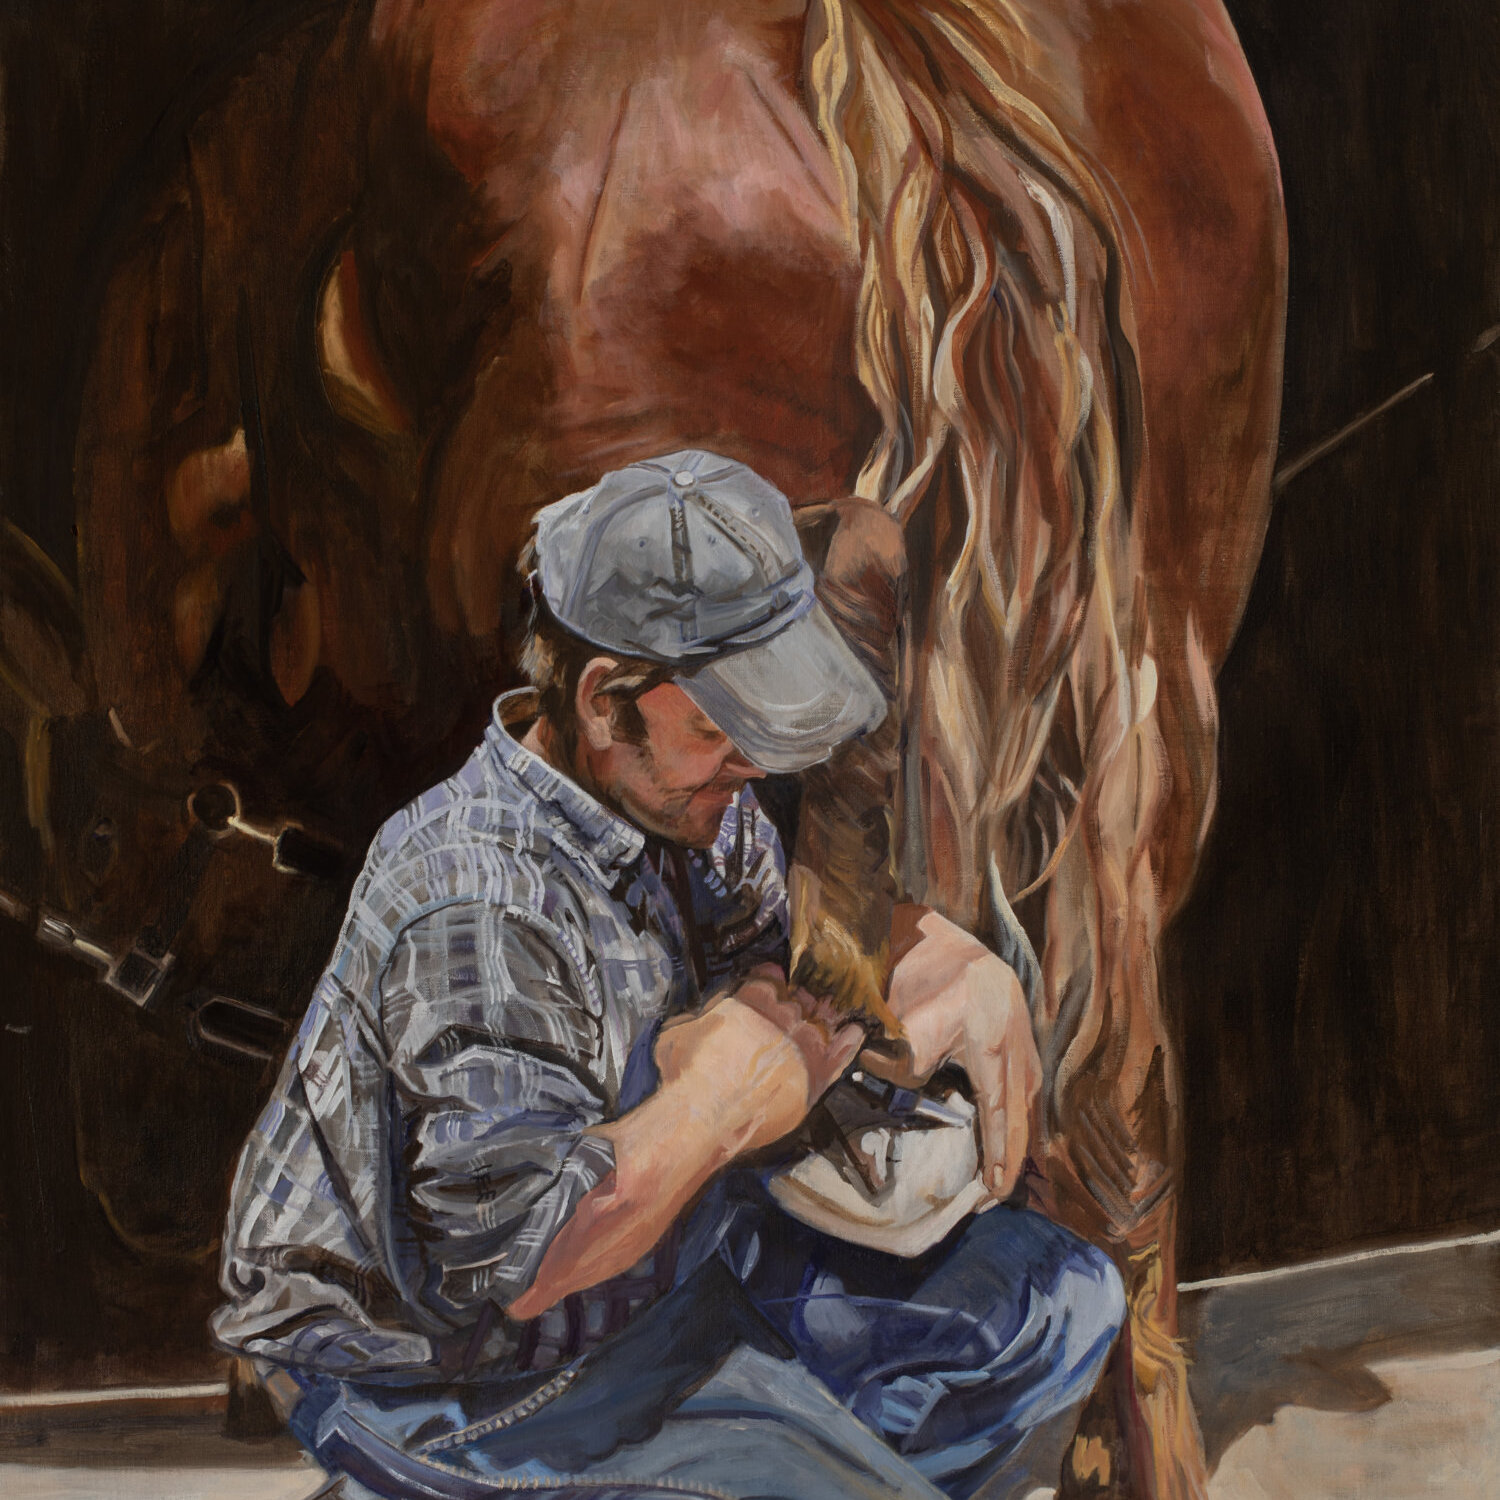 A Beautiful Painting of Man With Horse